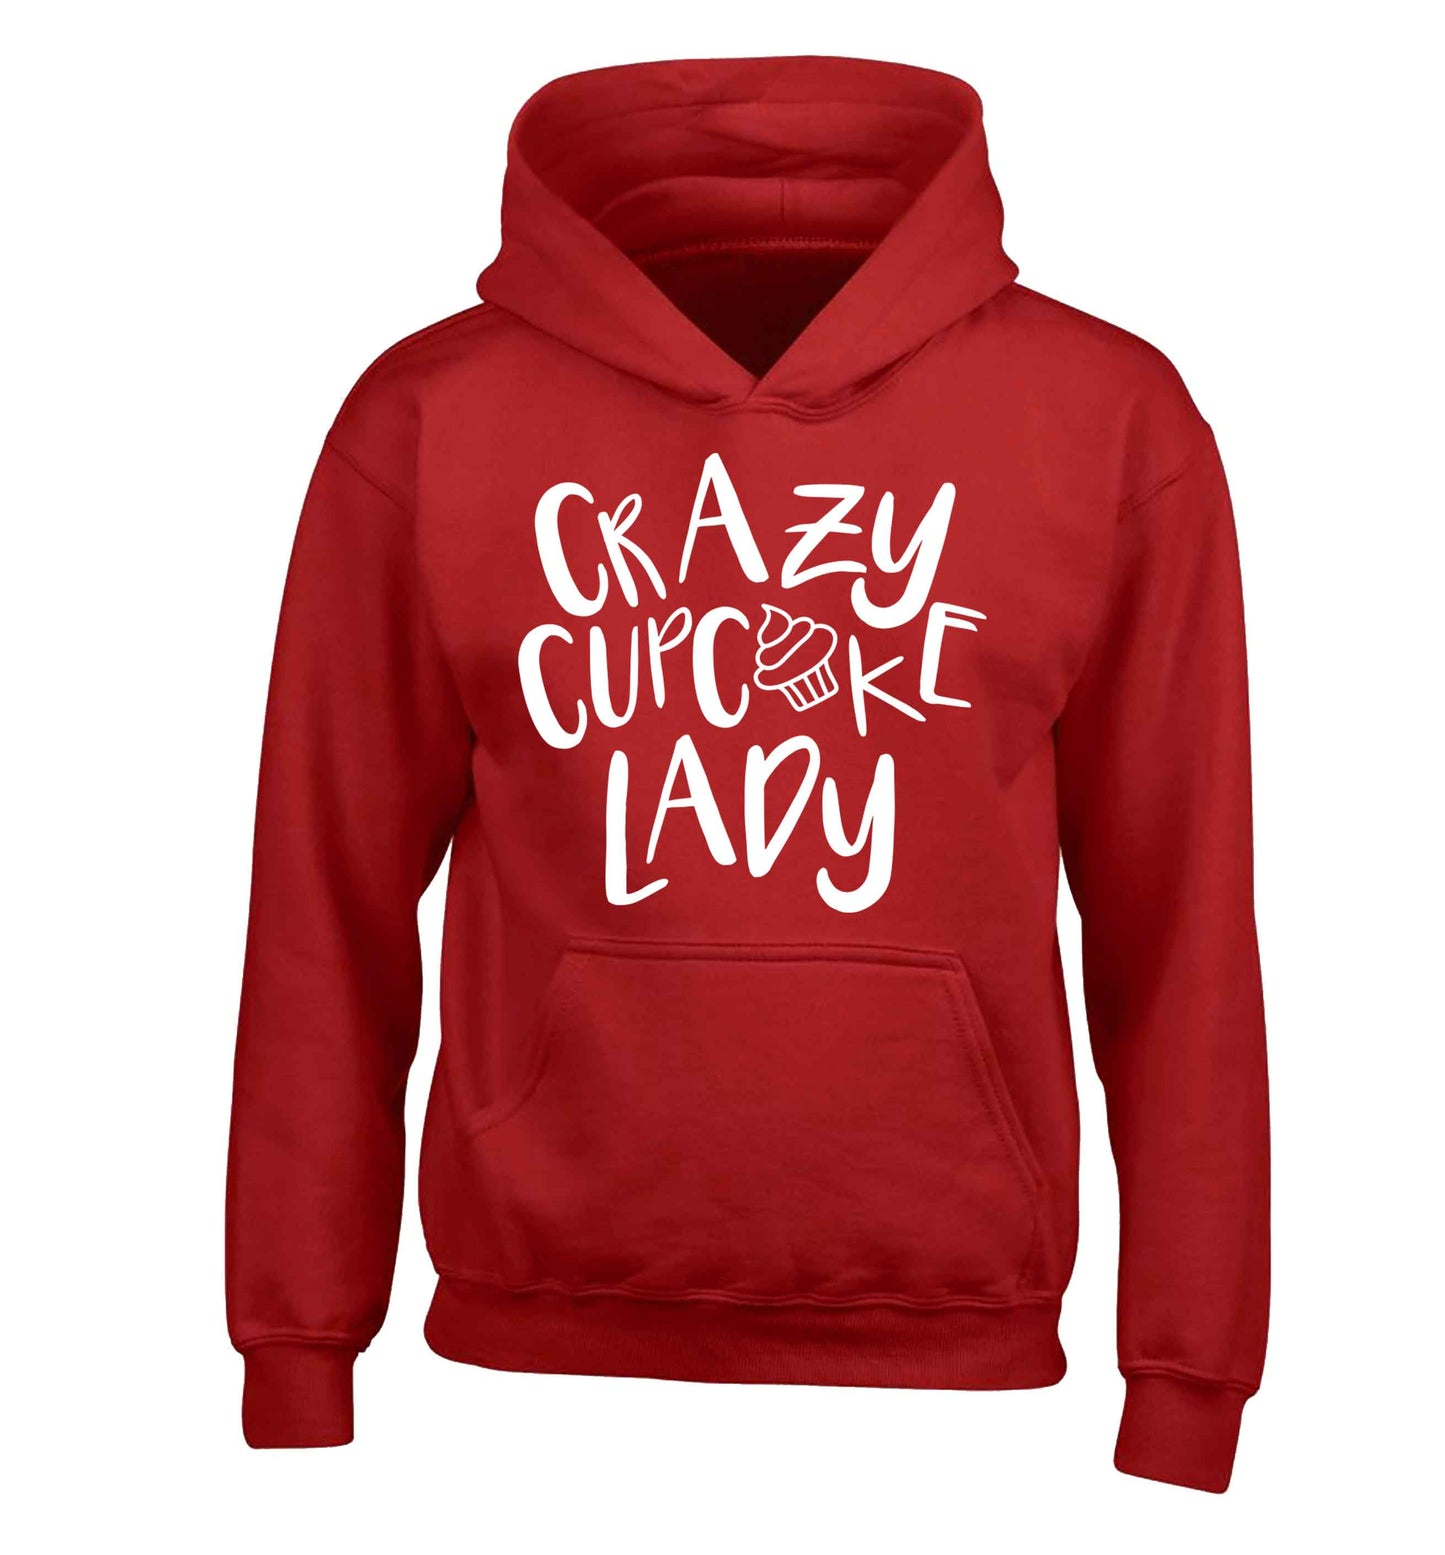 Crazy cupcake lady children's red hoodie 12-13 Years